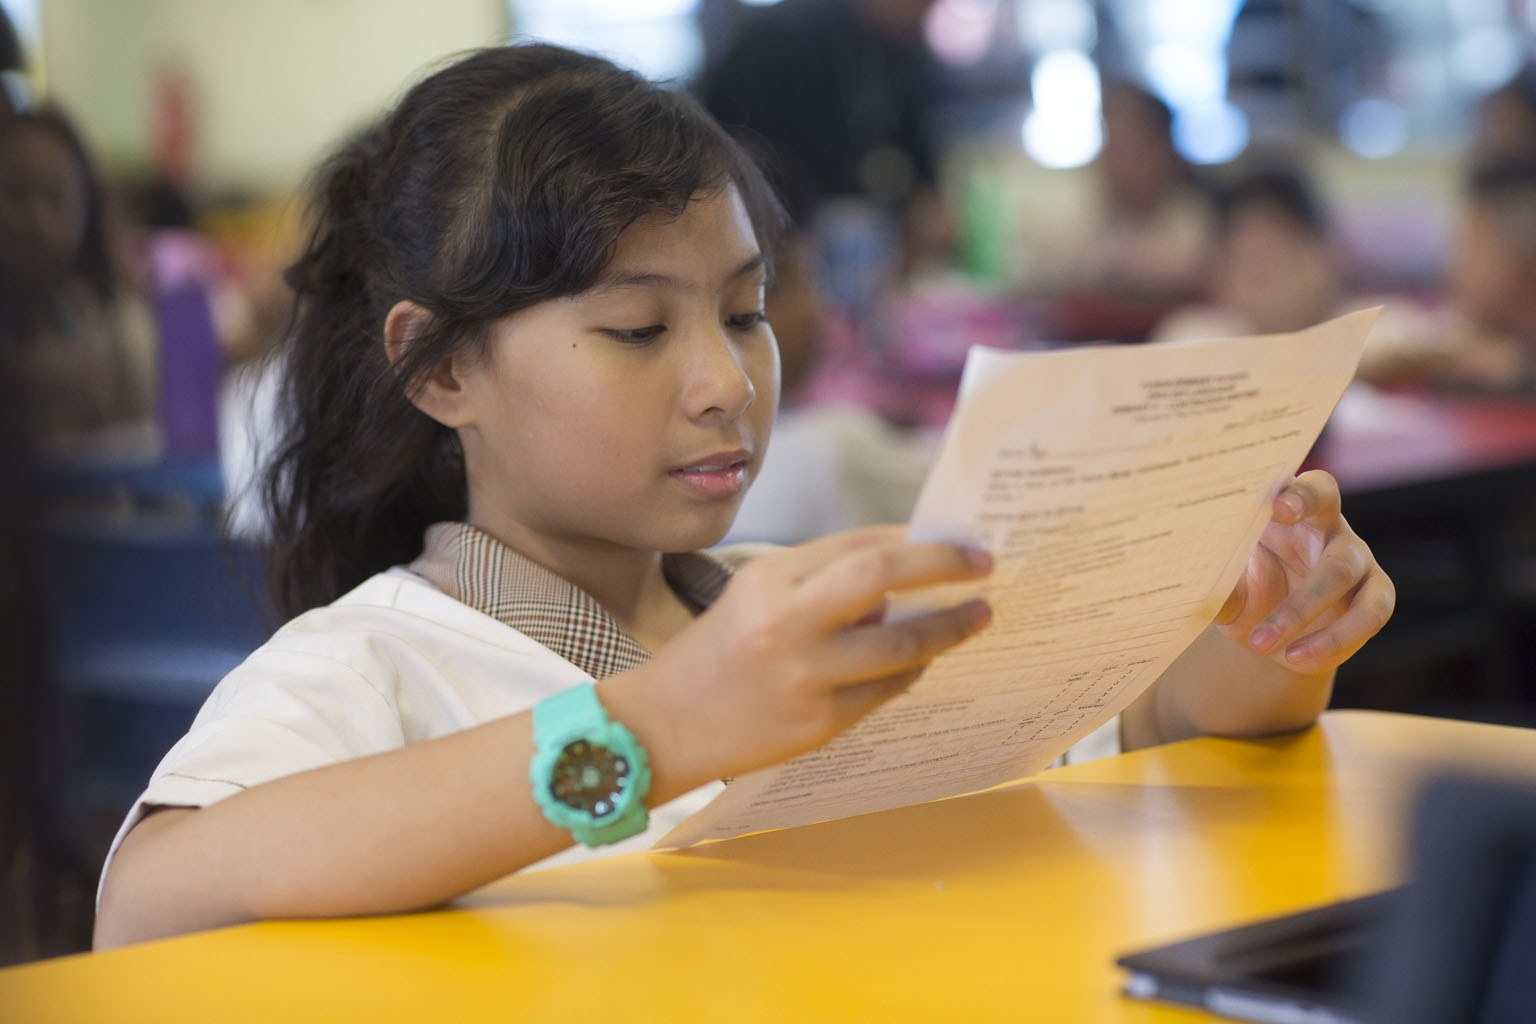 Stock Image: A primary school student working on an activity sheet